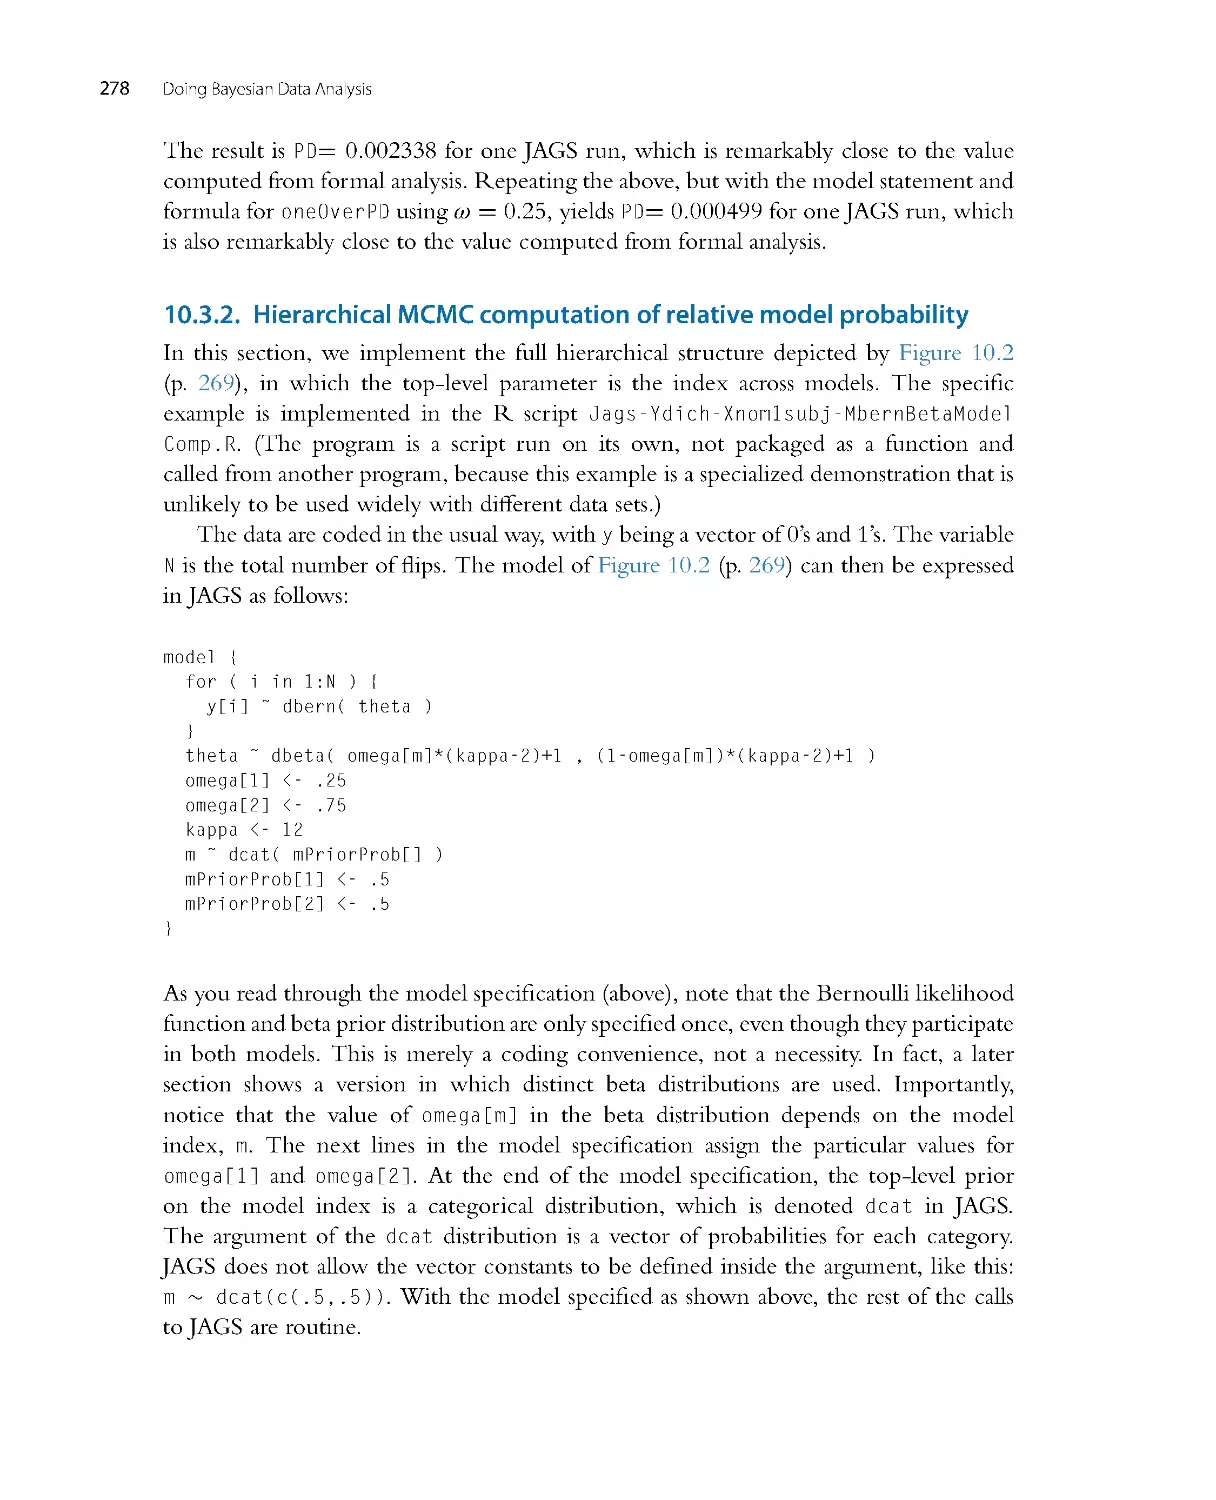 Hierarchical MCMC computation of relative model probability